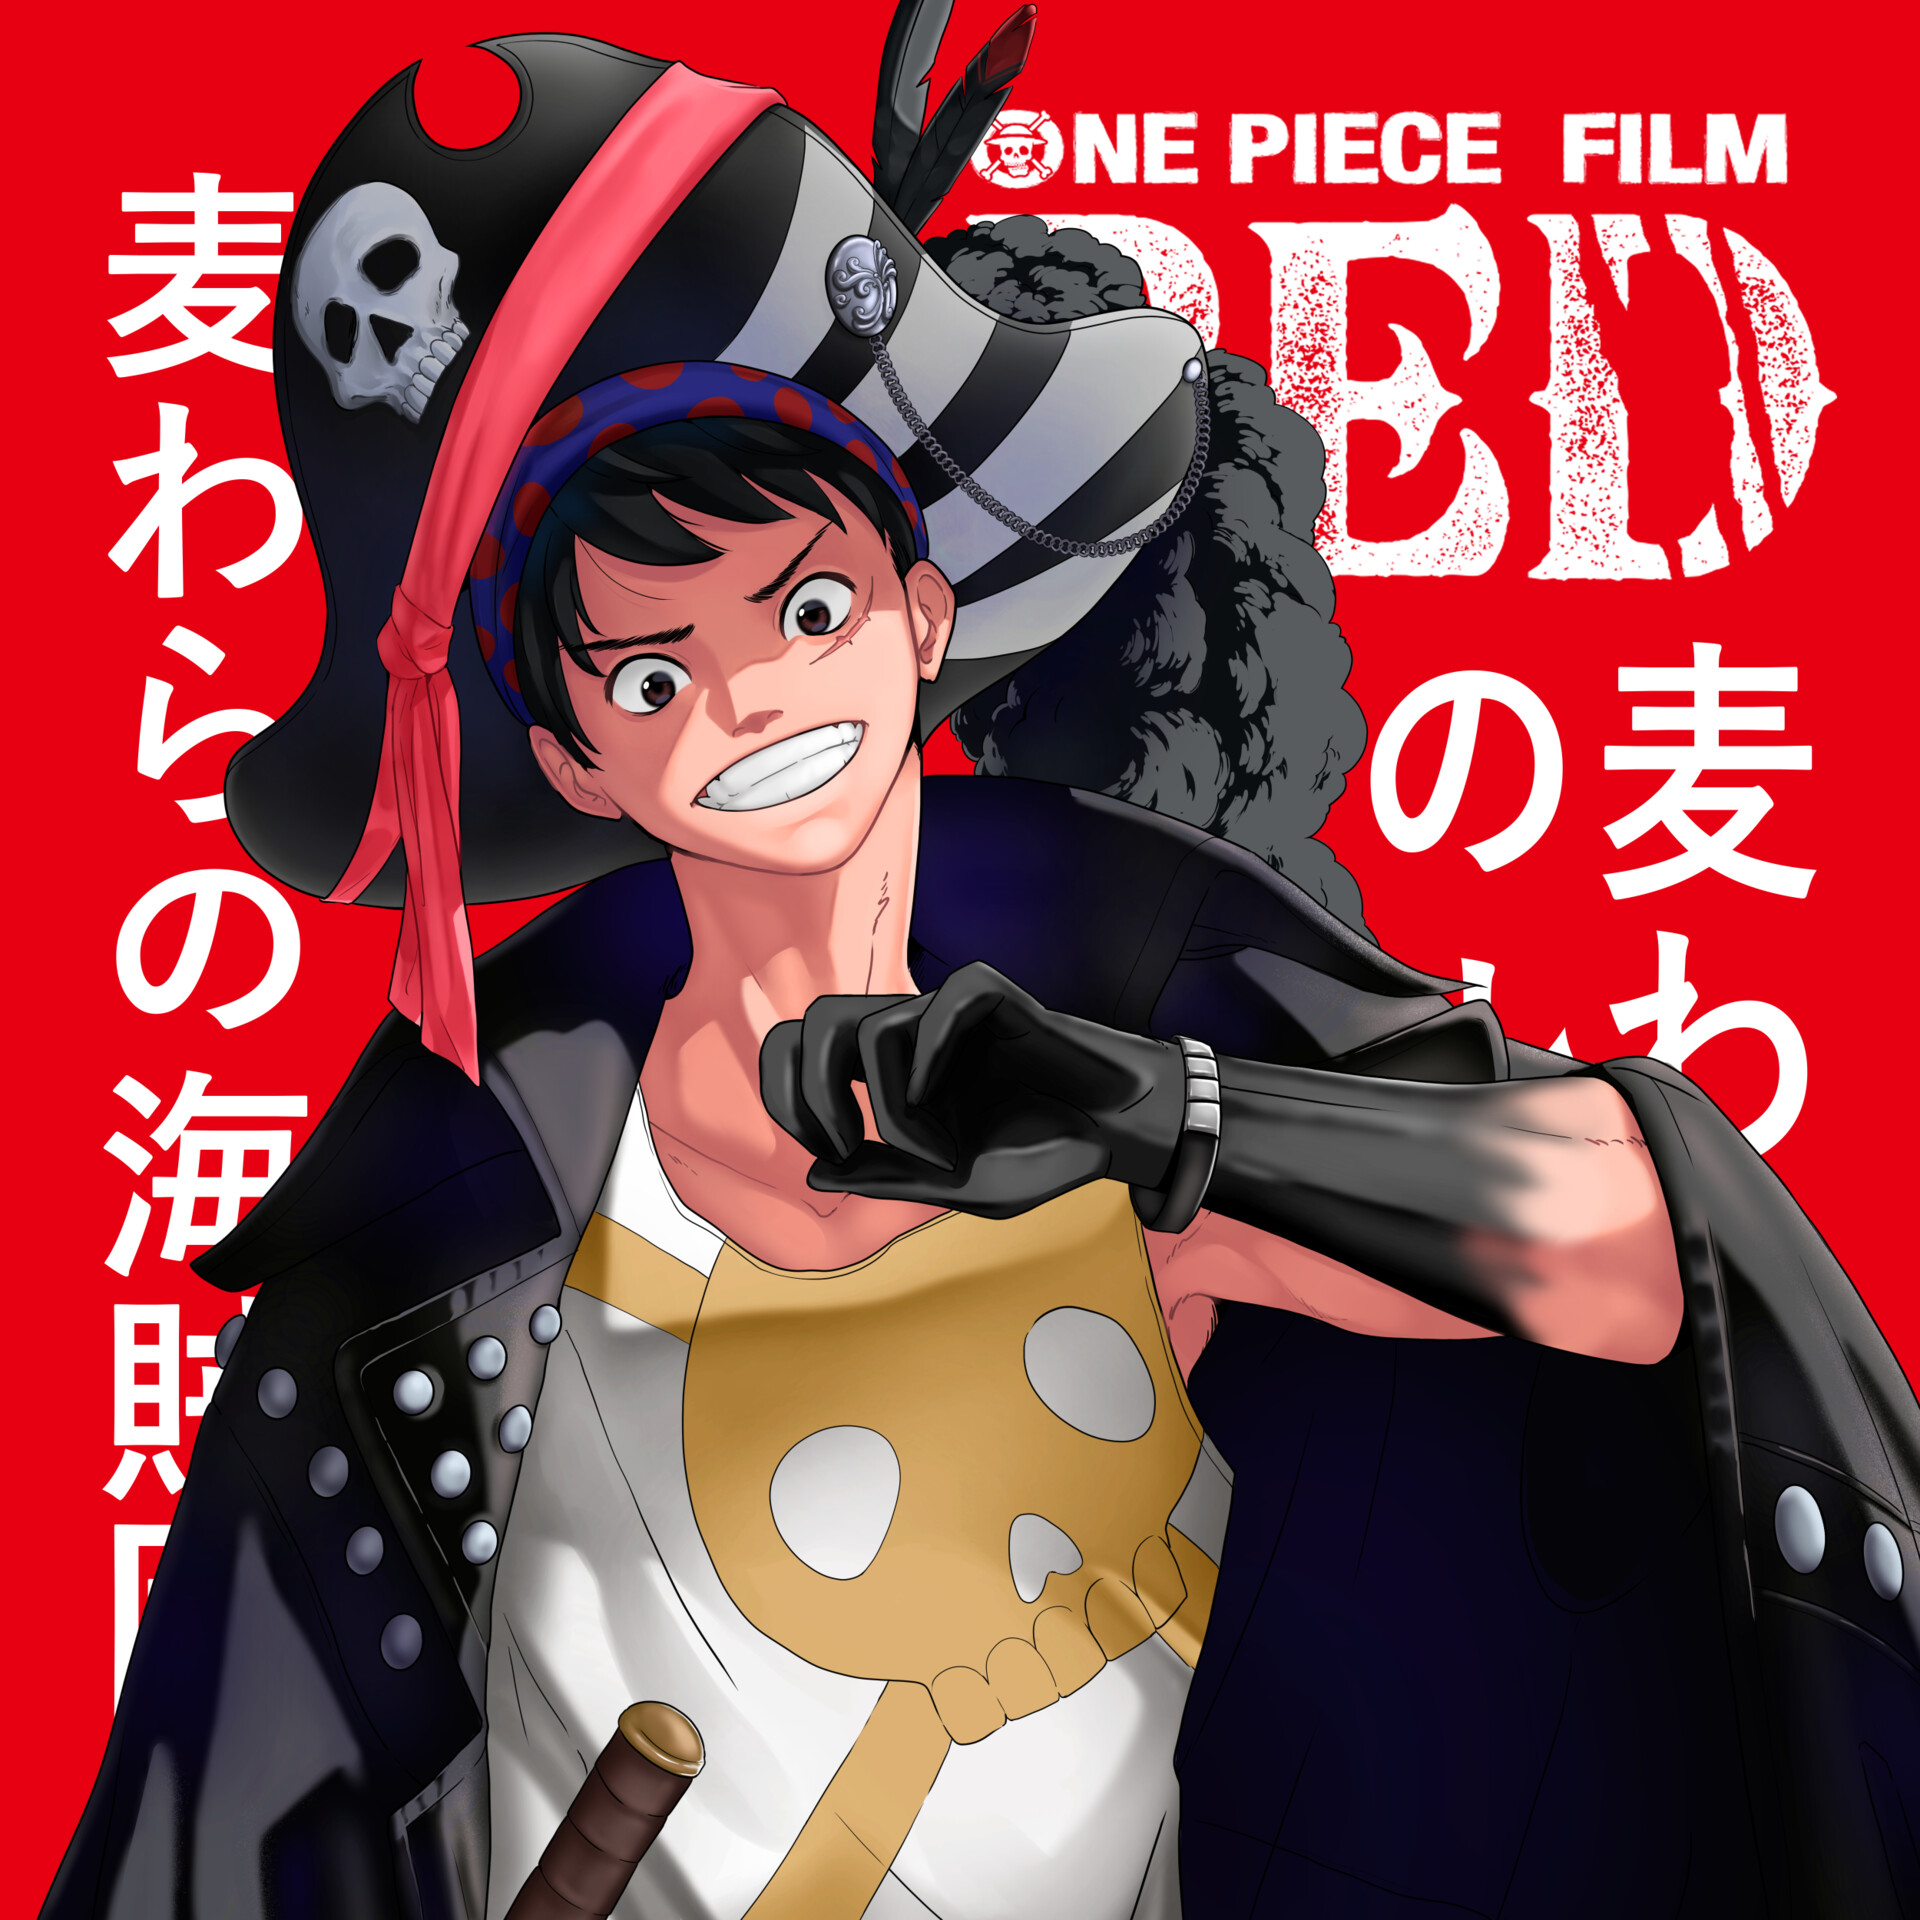 First Look Clip of Anime Film Once Piece Film Red - LRM